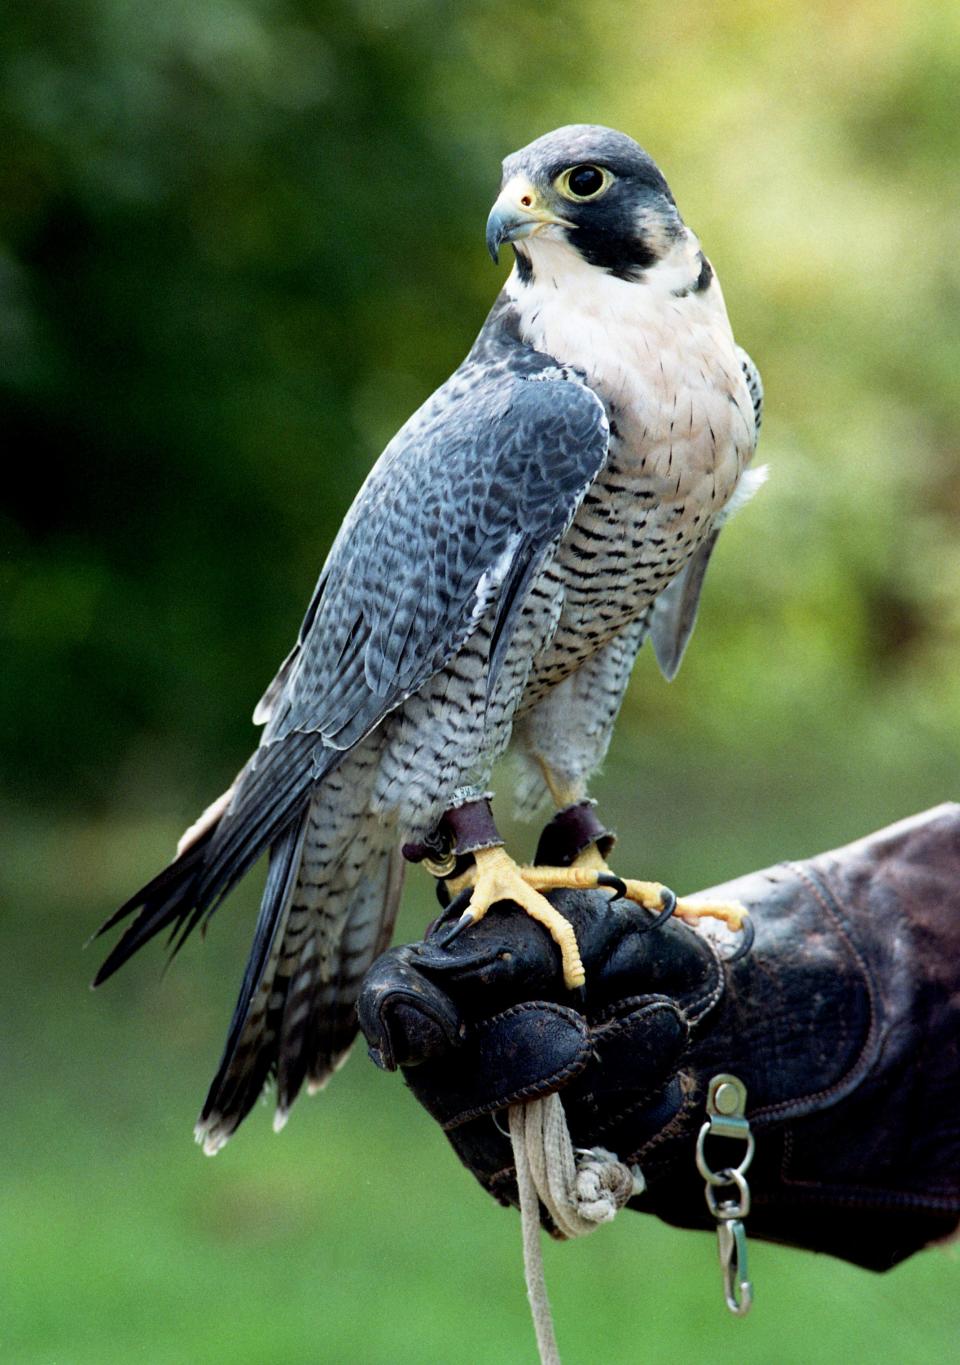 One man's pursuit of falconry was full of bad ideas from the start.